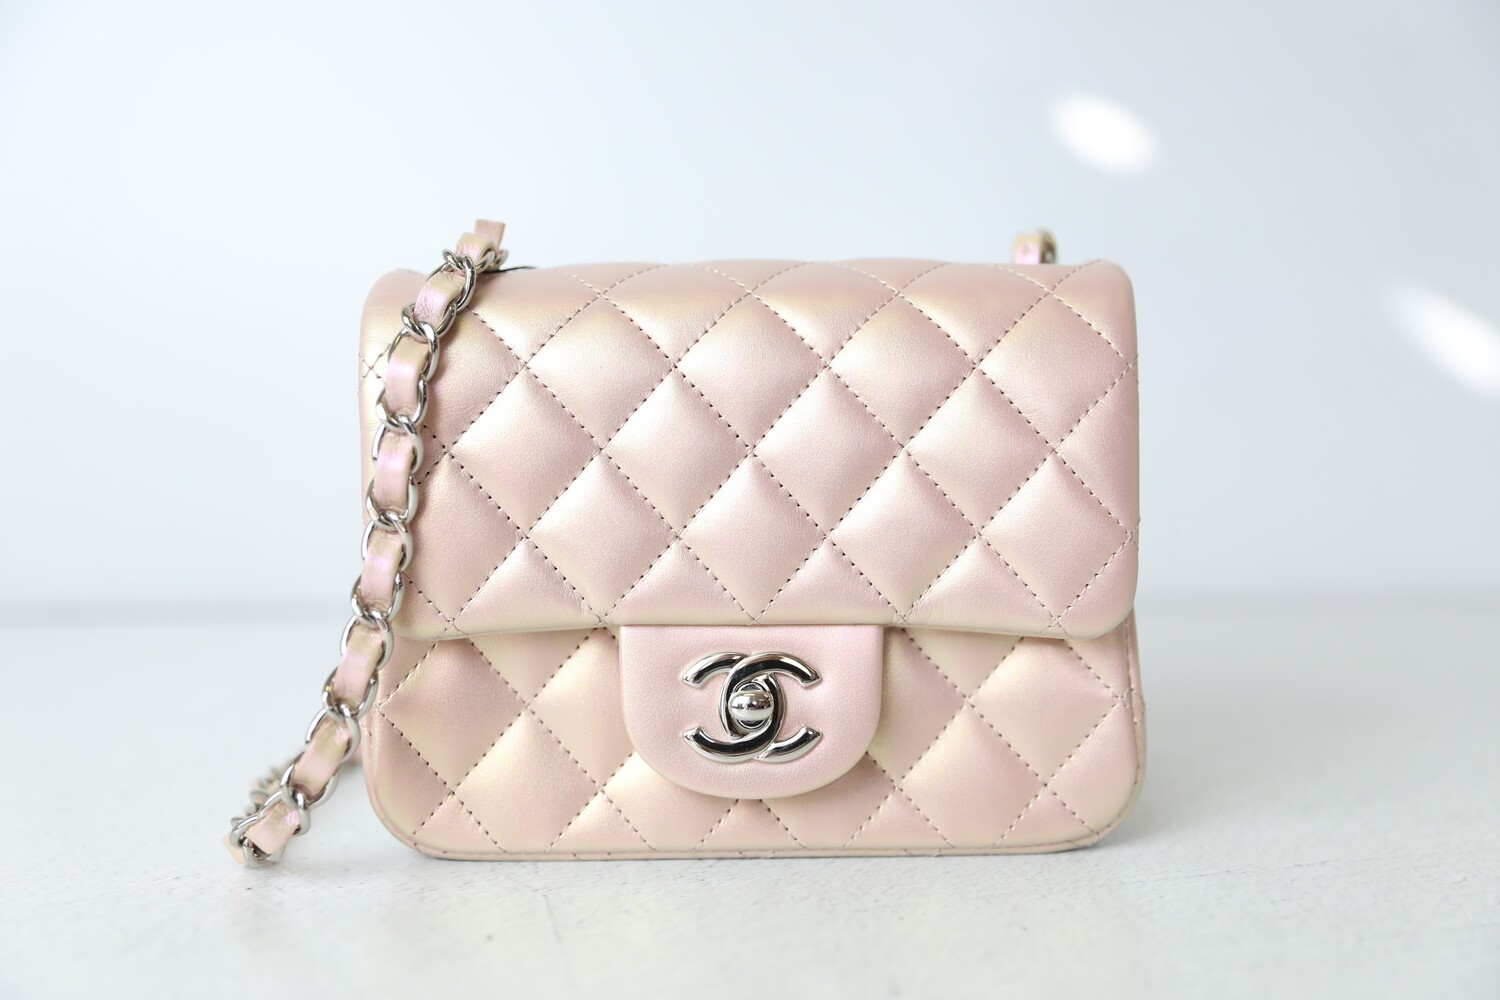 Chanel Classic Mini Square Single Flap, Pink Iridescent Calfskin Leather with Silver Hardware, Preowned In Box WA001